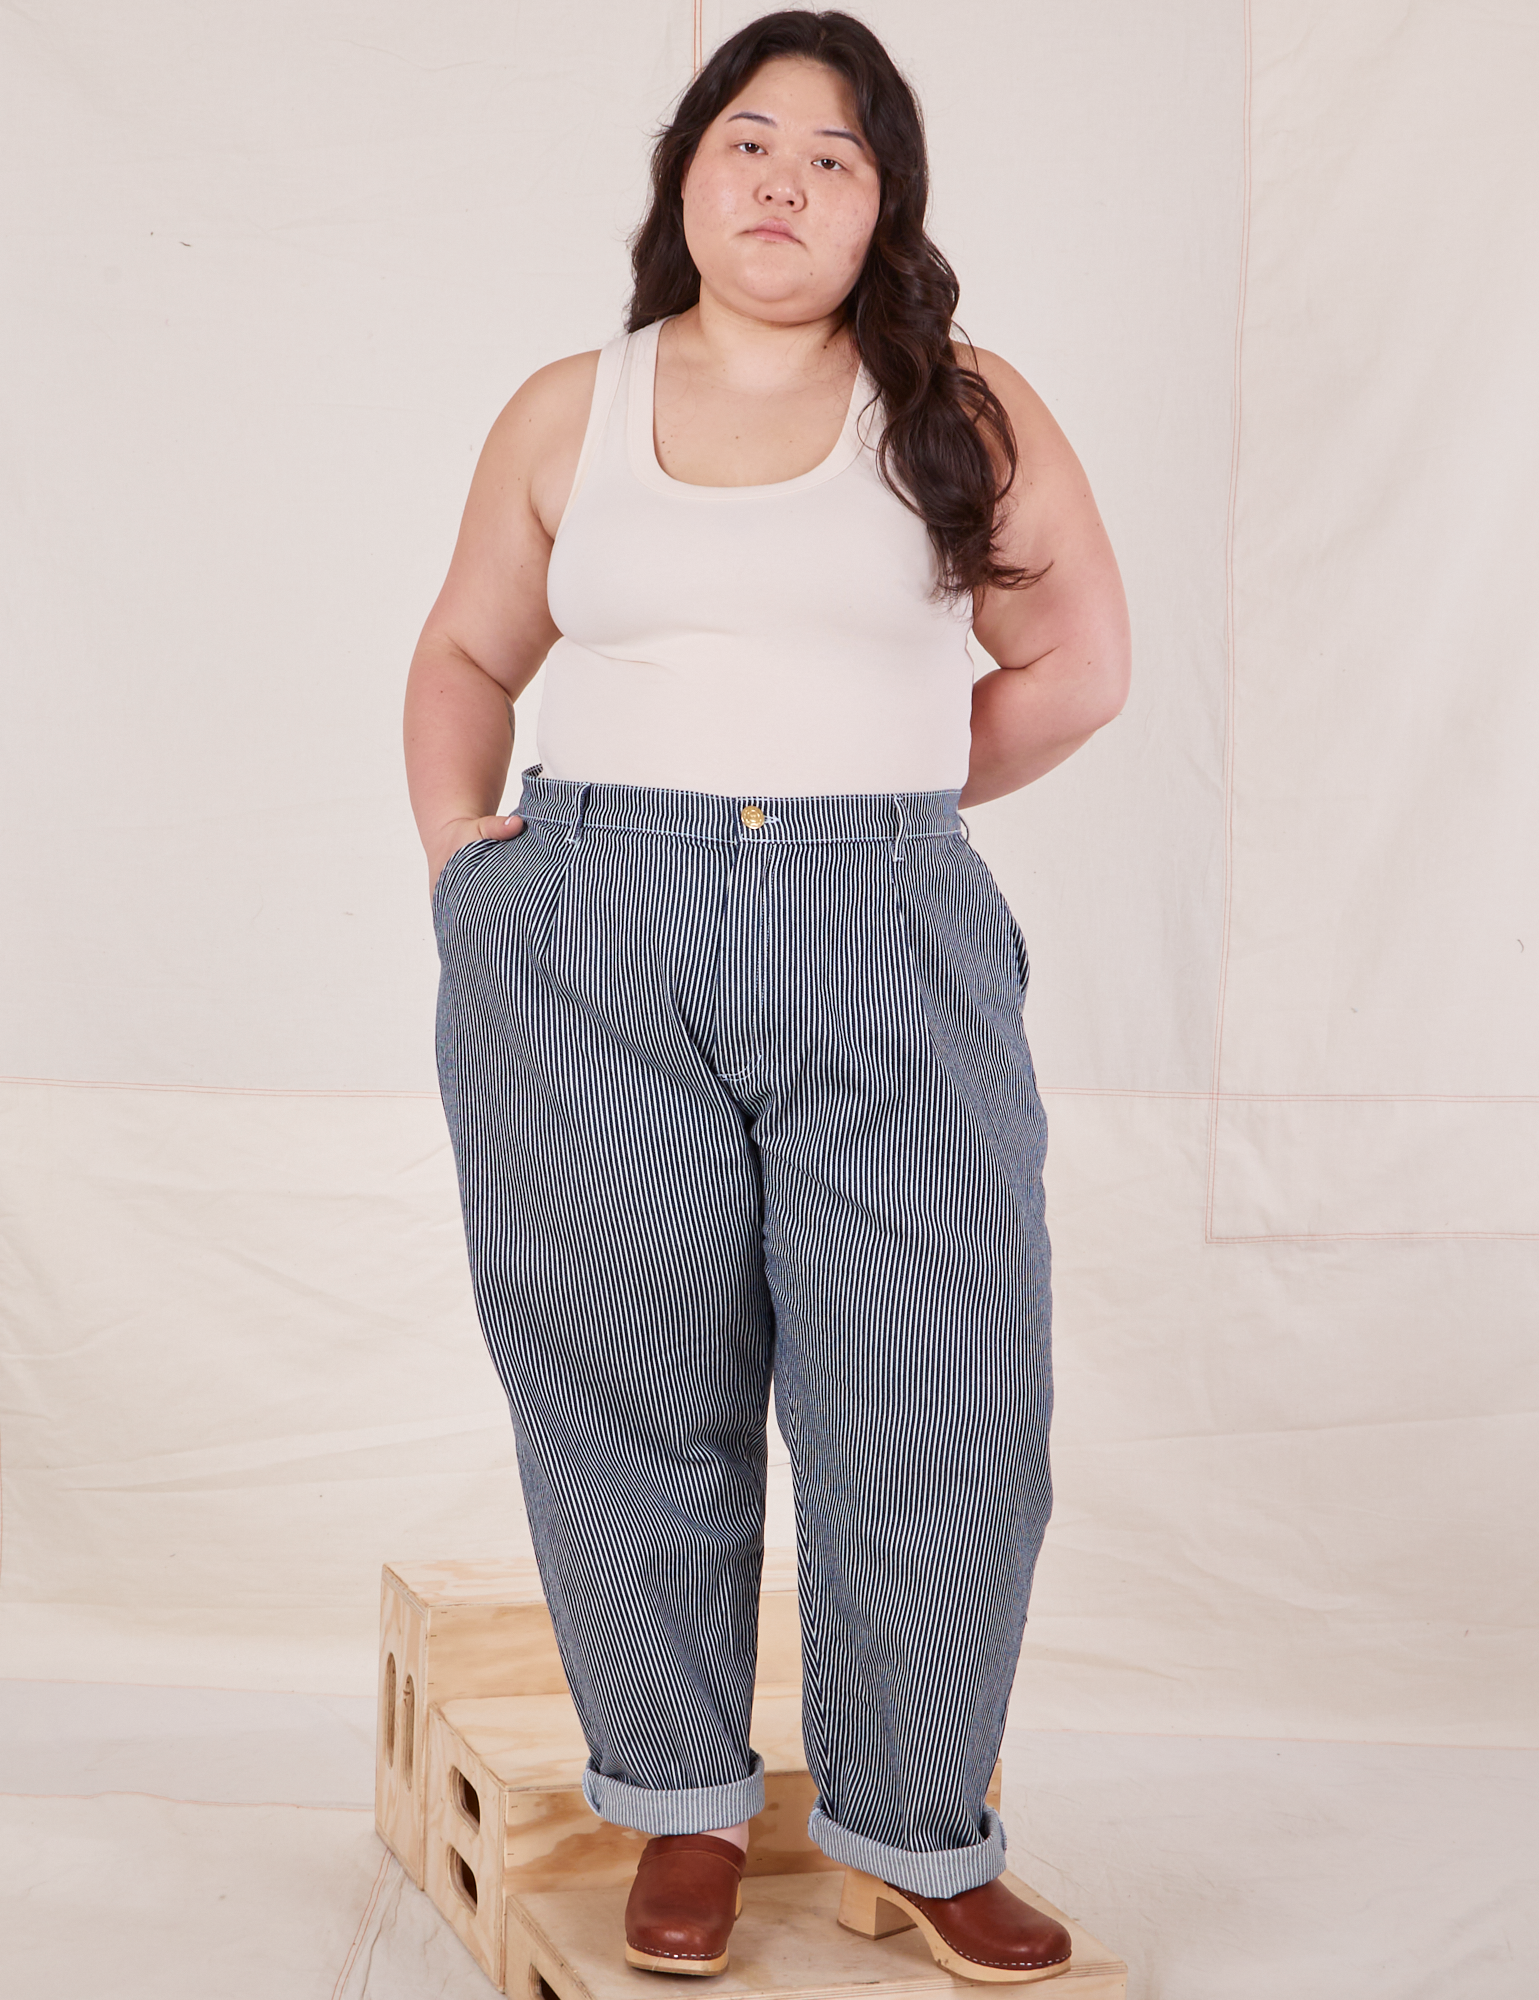 Ashley is 5&#39;7&quot; and wearing 1XL Denim Trouser Jeans in Railroad Stripe paired with a vintage off-white Tank Top